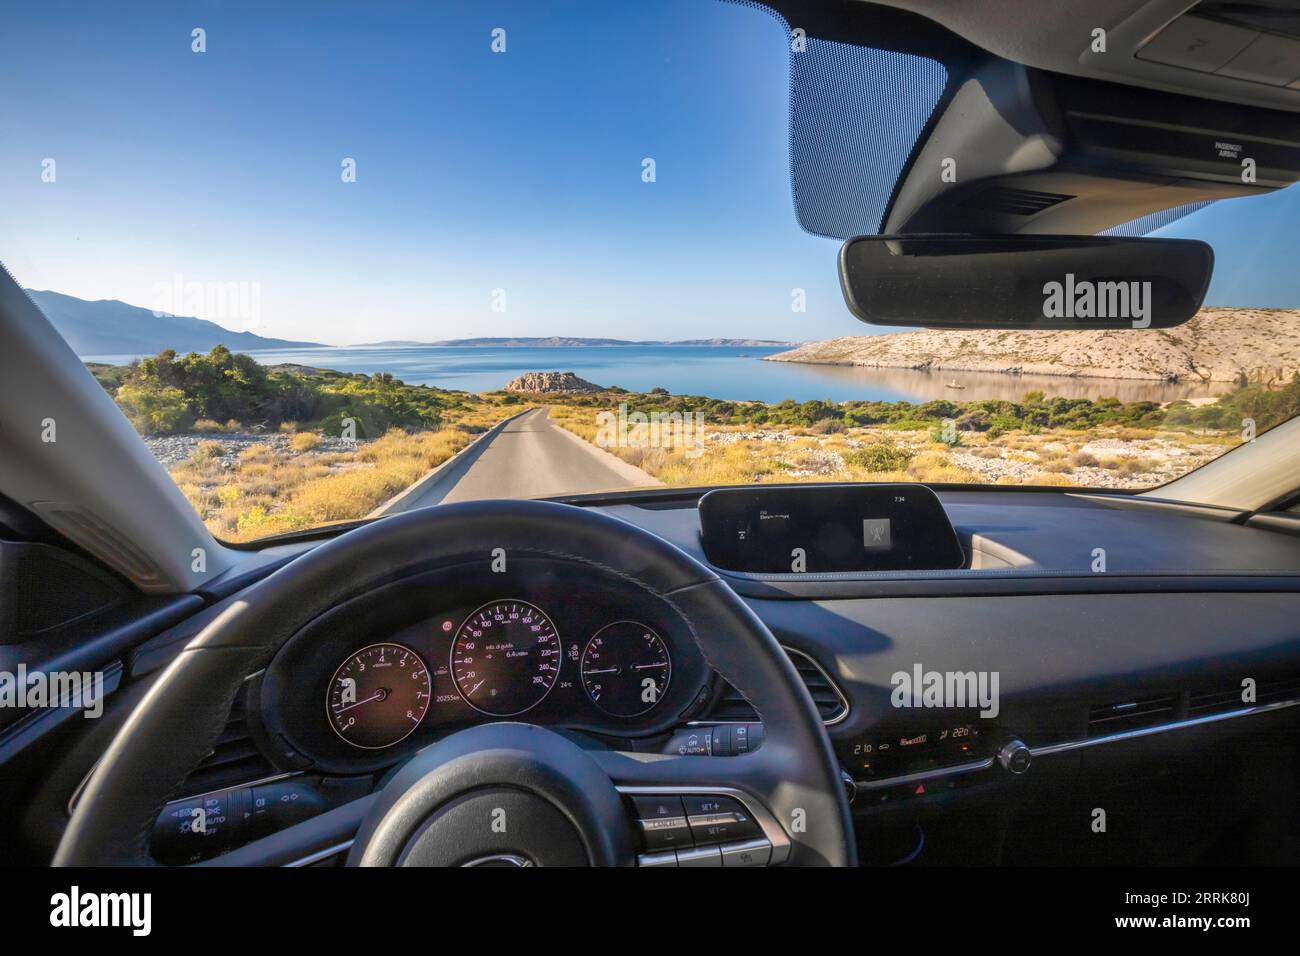 Europe, Croatia, Primorje-Gorski Kotar County, Rab island, view from inside the car driving towards the sea on a narrow access road Stock Photo